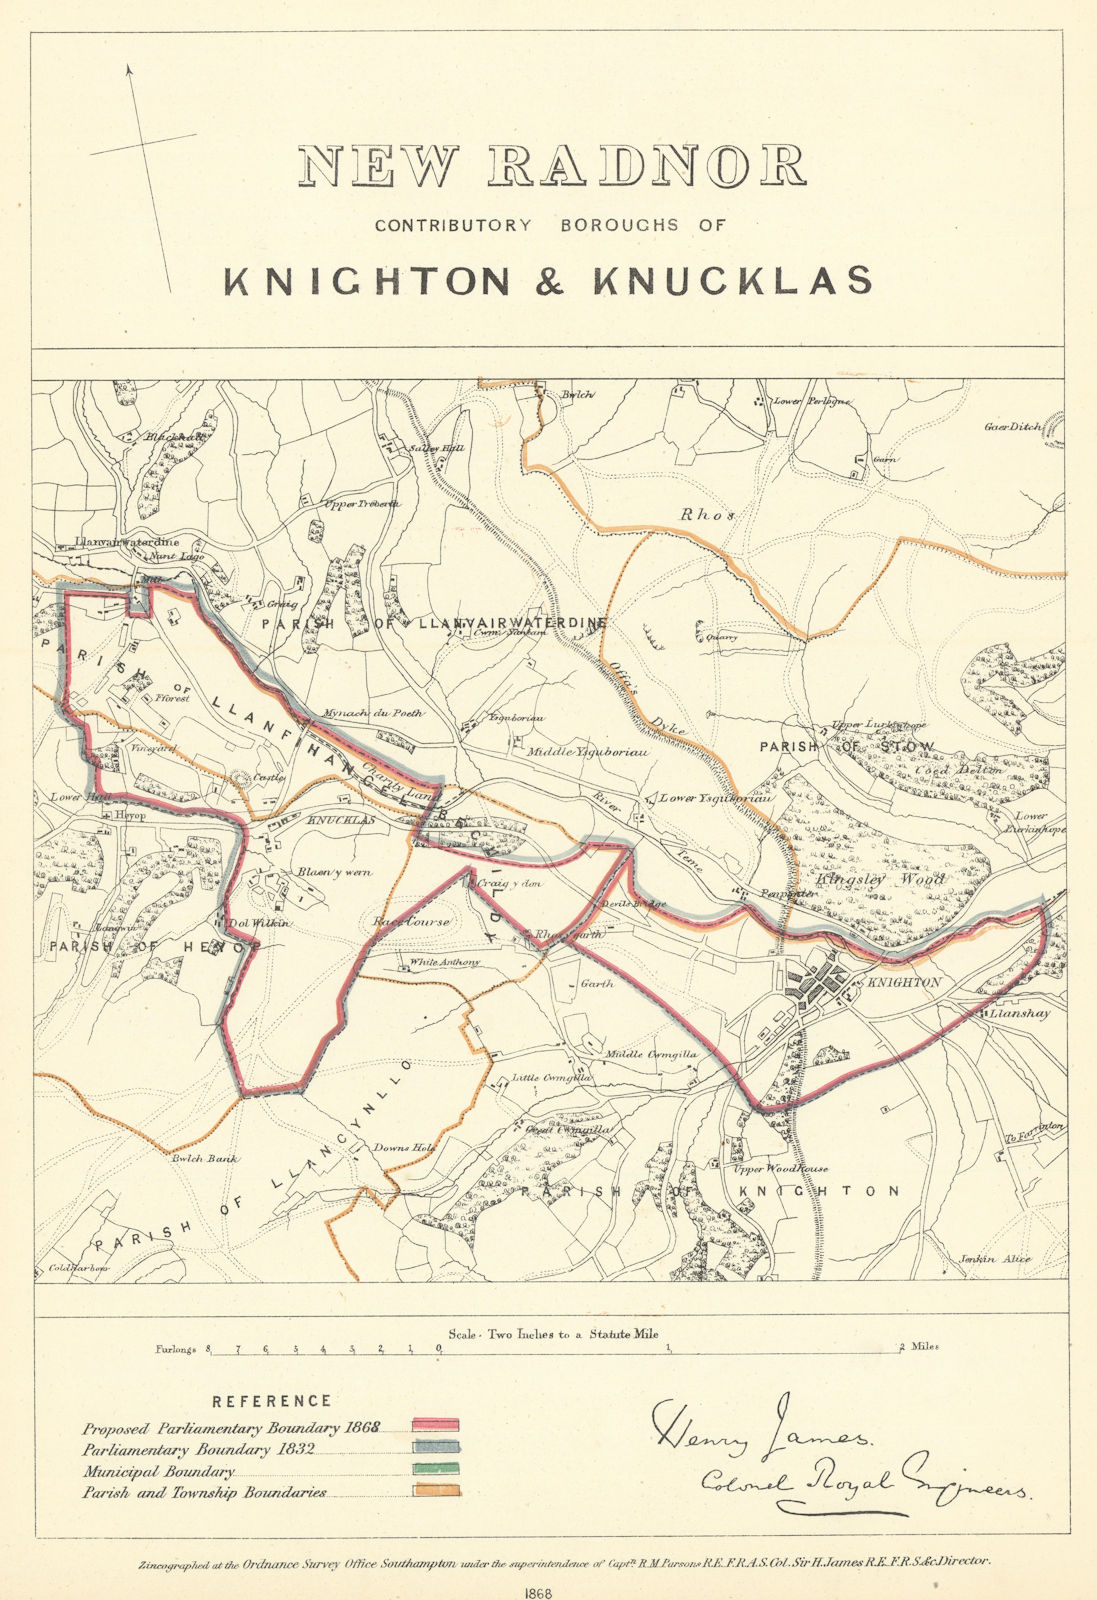 New Radnor Boroughs of Knighton & Knucklas. JAMES. Boundary Commission 1868 map